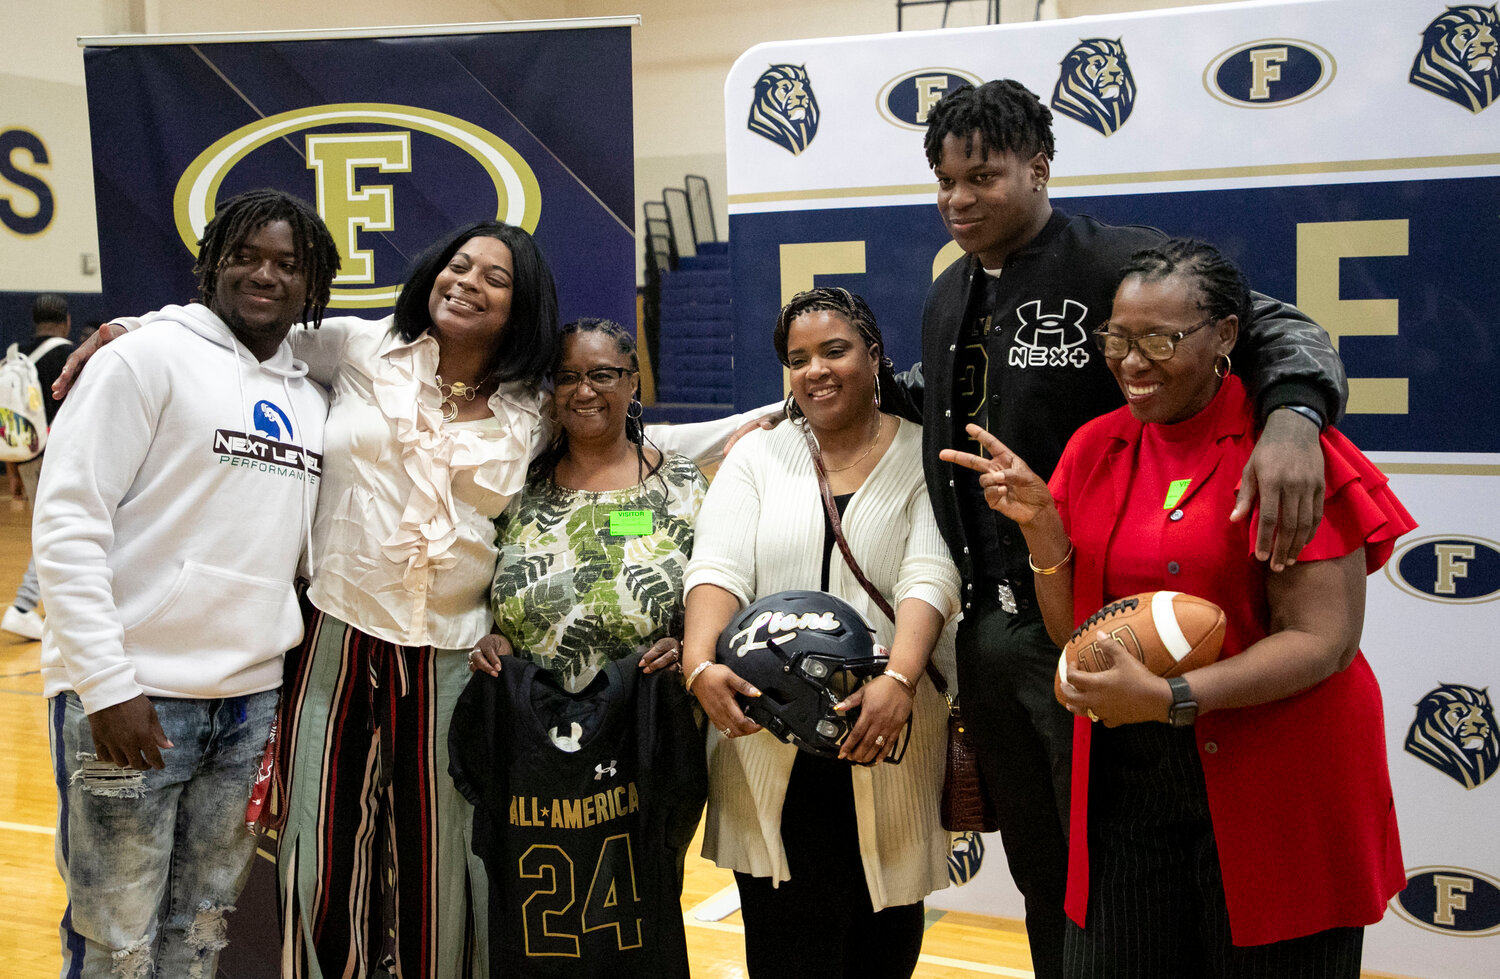 Friends and family joined Lion senior Perry Thompson in celebrating Friday’s jersey presentation ahead of the Under Armour All-American Game on Jan. 3, 2024.